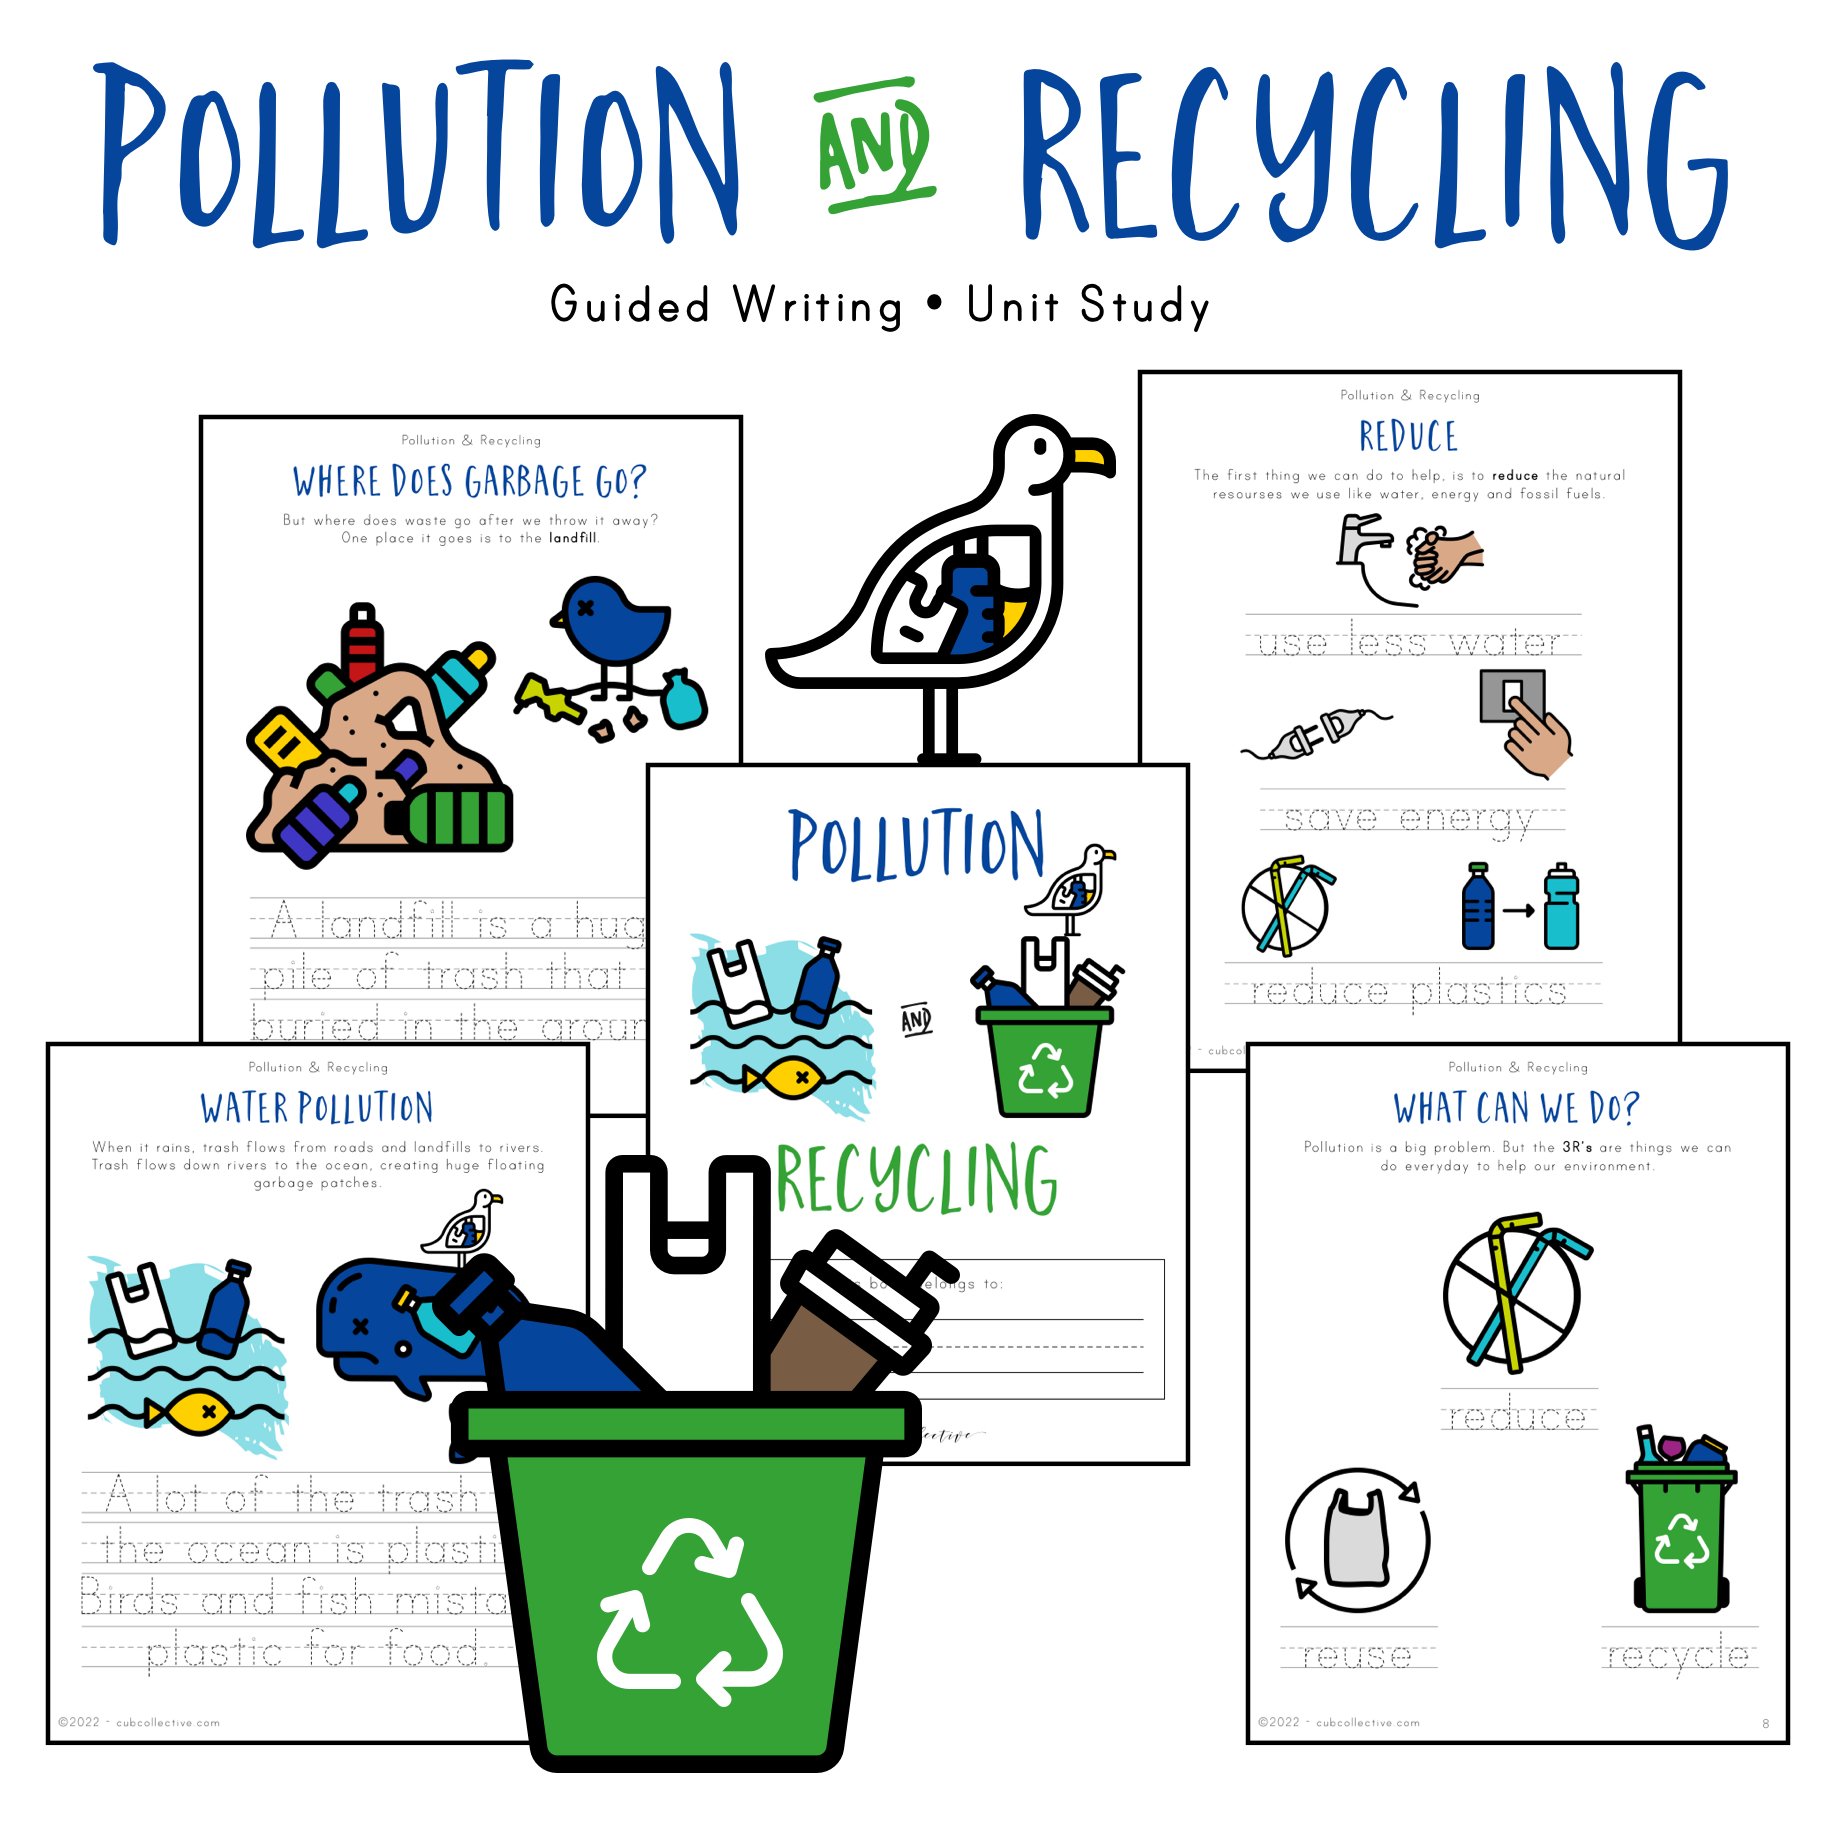 Reducing fishing line pollution one recycling bin at a time